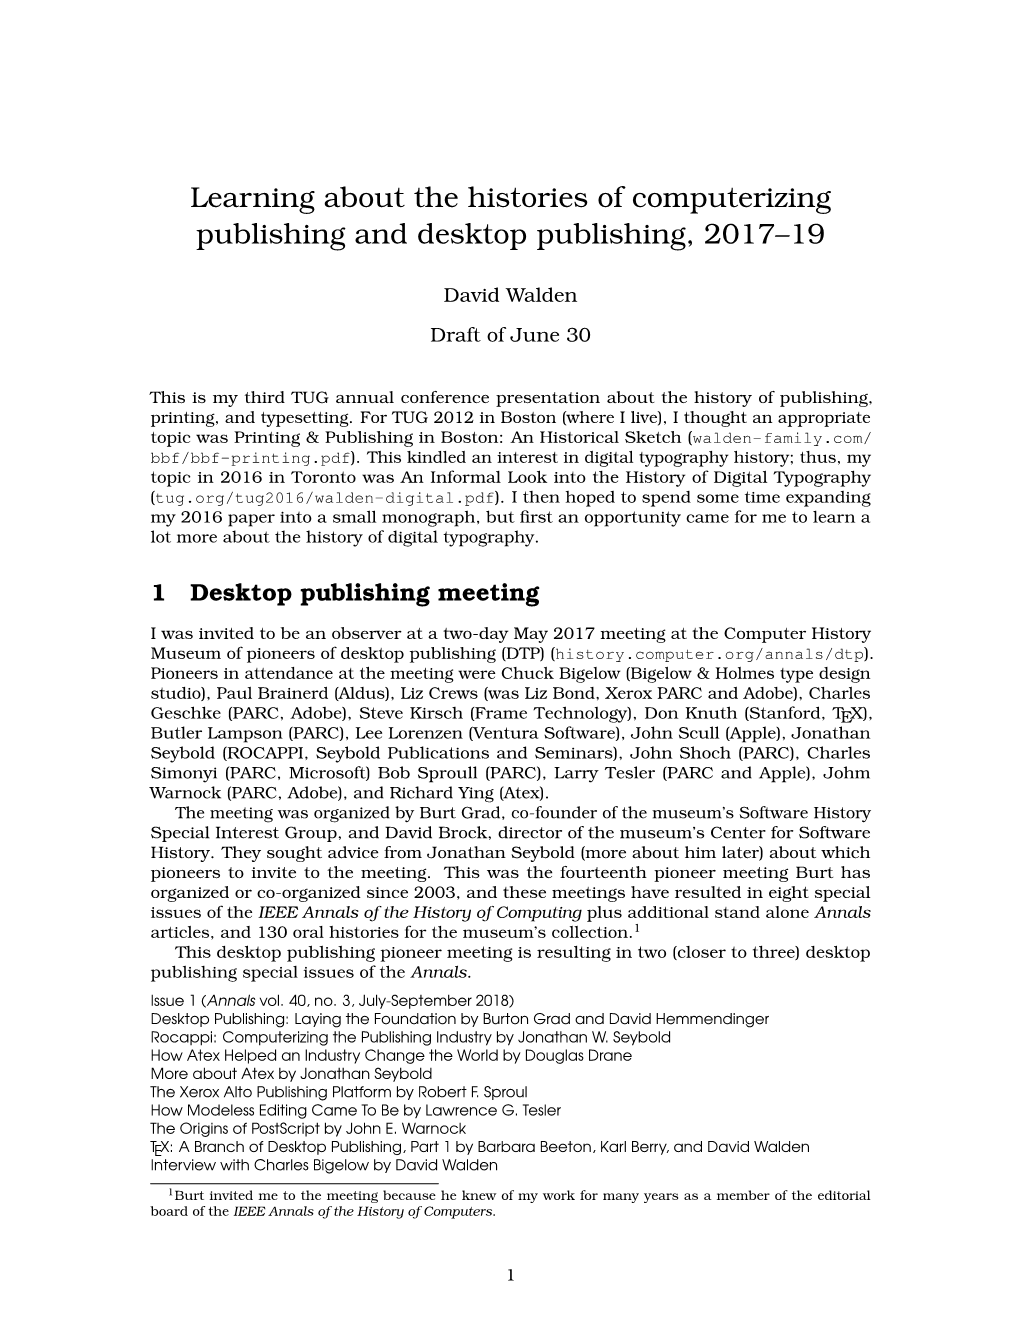 Learning About the Histories of Computerizing Publishing and Desktop Publishing, 2017–19